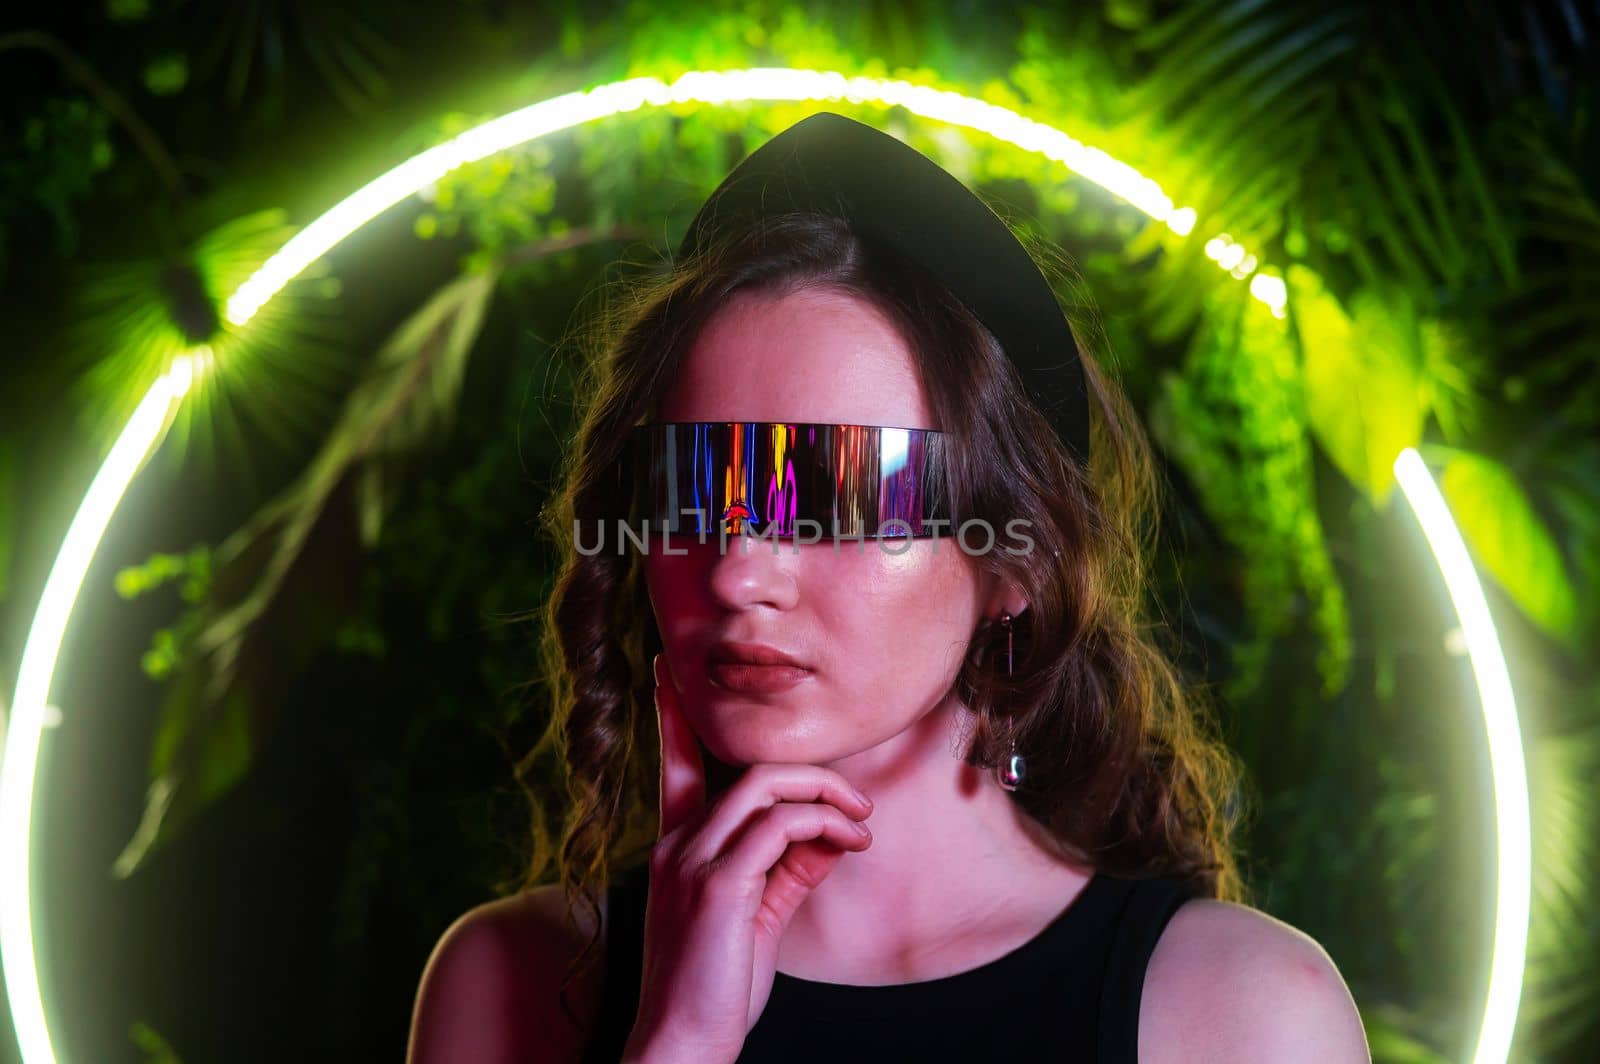 Caucasian woman in panoramic sunglasses against the background of an annular neon lamp in plants